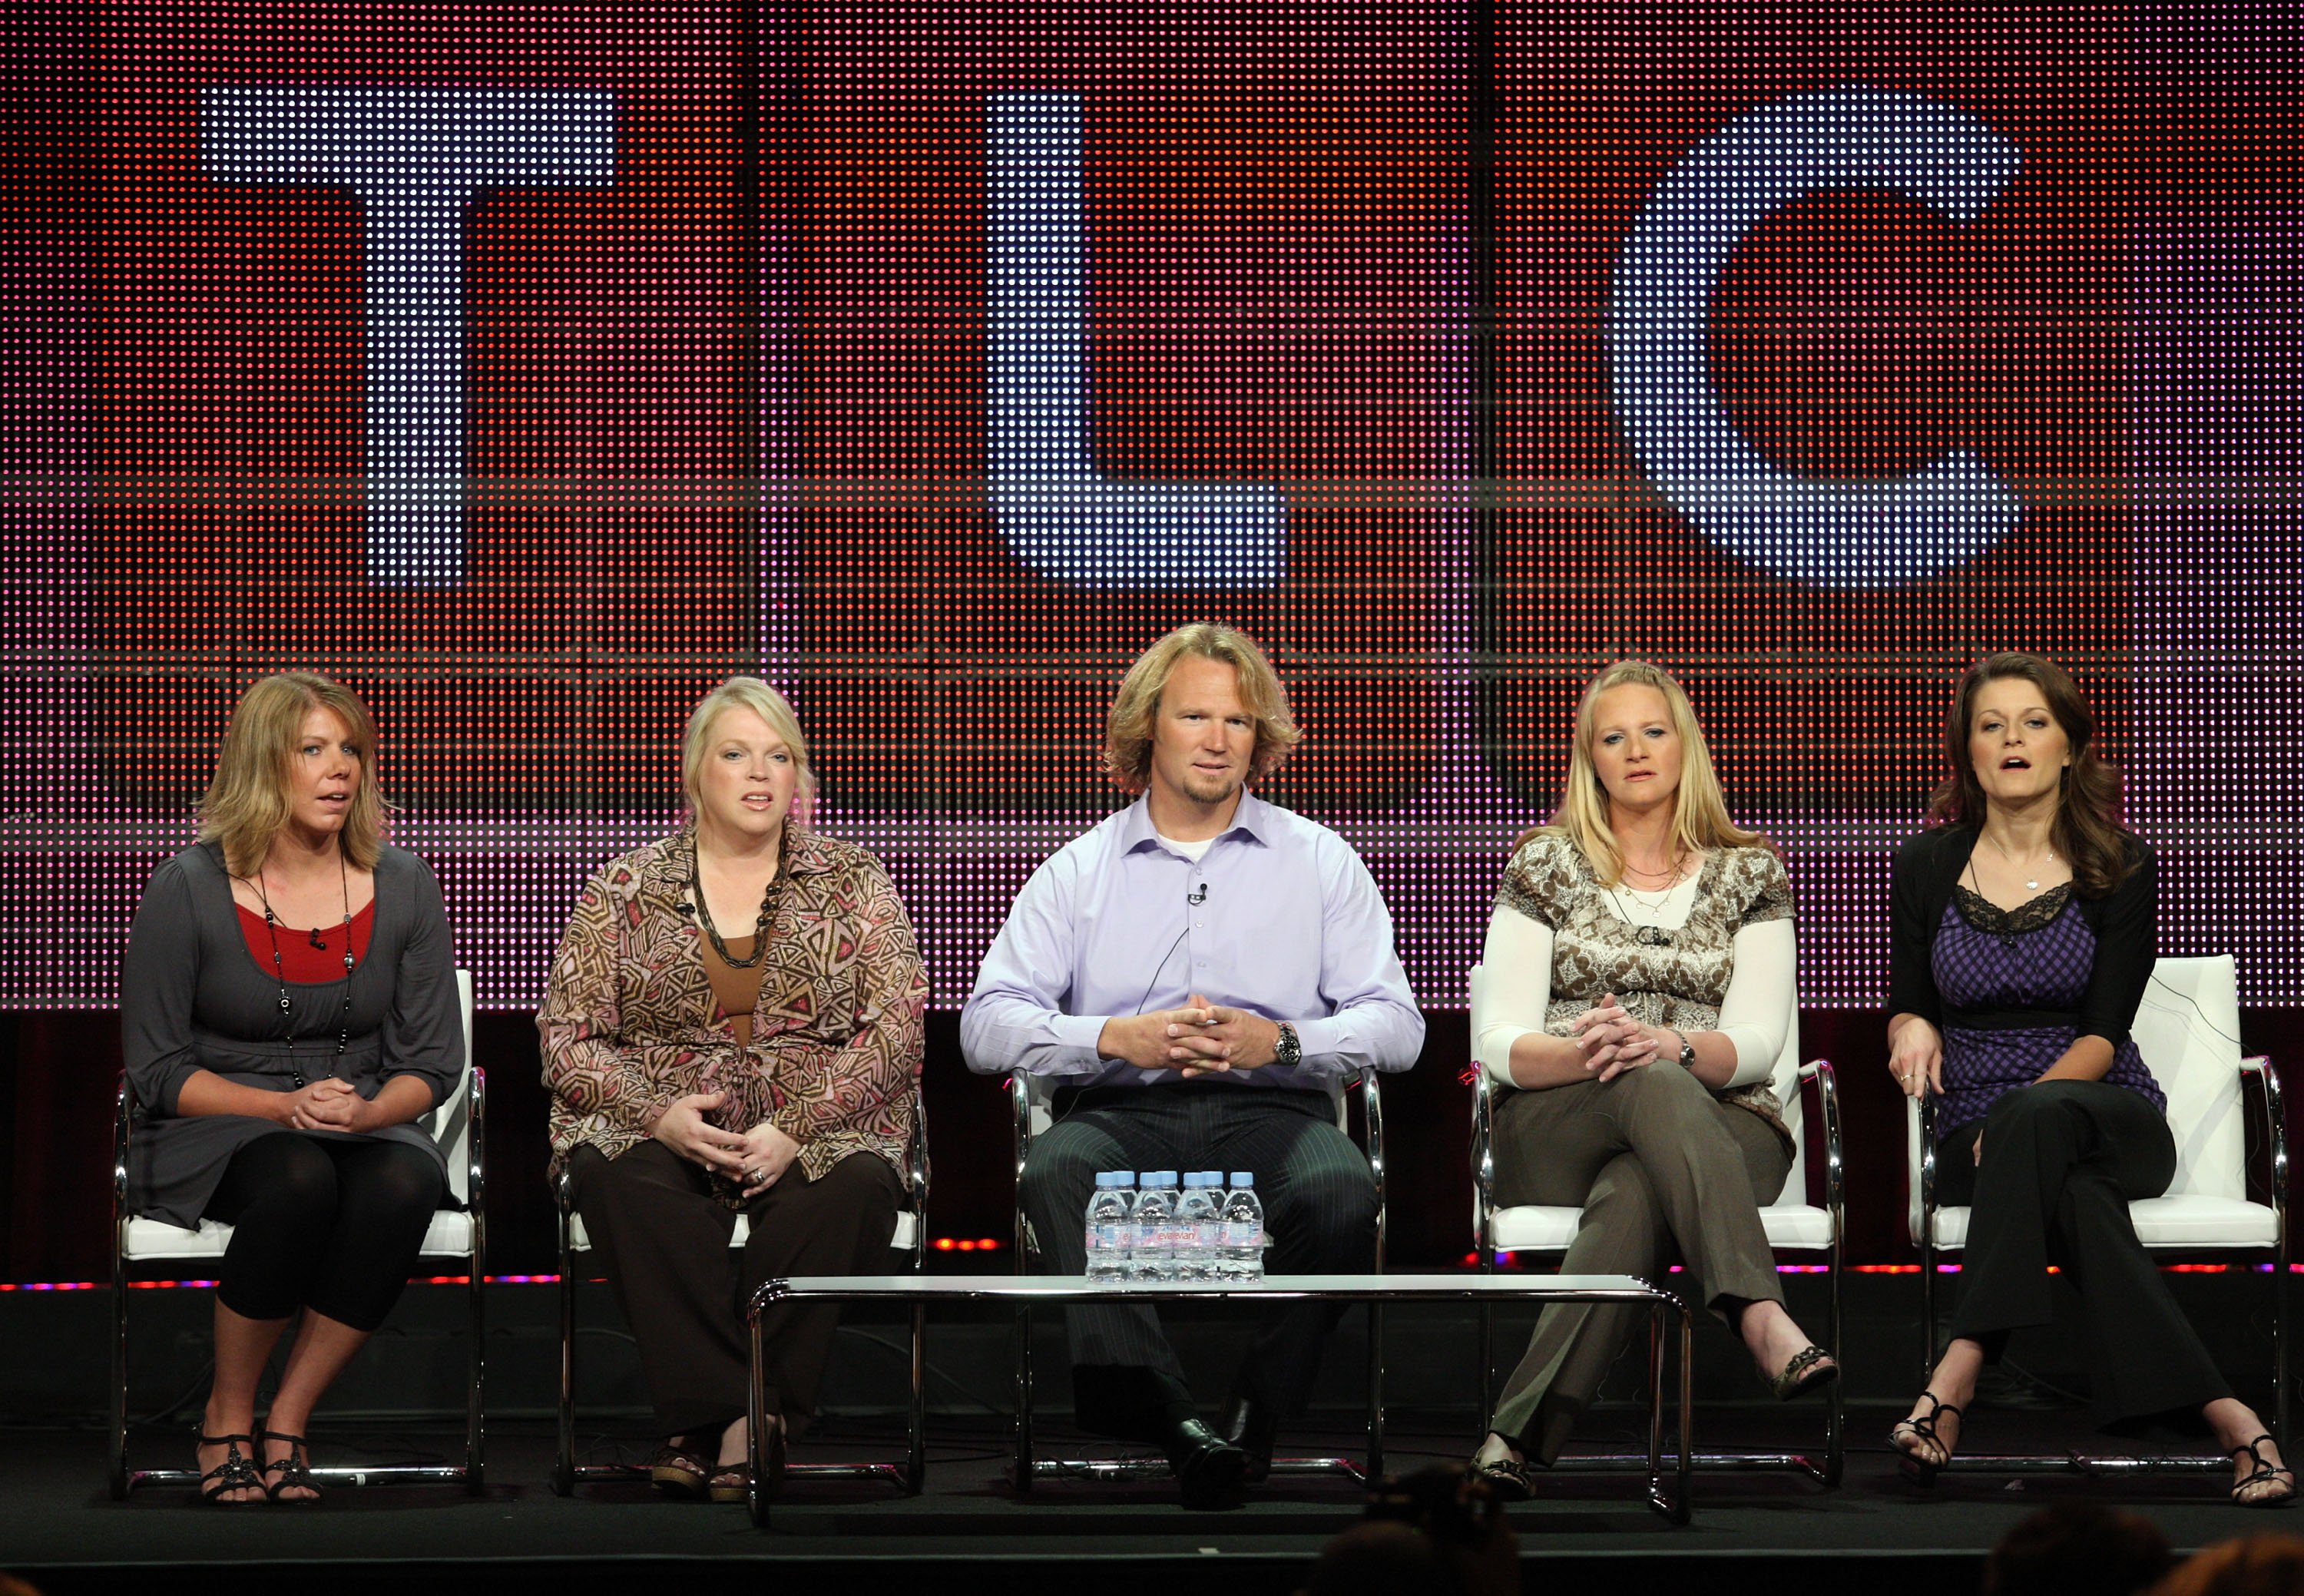 Meri Brown, Janelle Brown, Kody Brown, Christine Brown and Robyn Brown appear on stage at the 2010 Summer TCA Press Tour ahead of the premiere of 'Sister Wives'